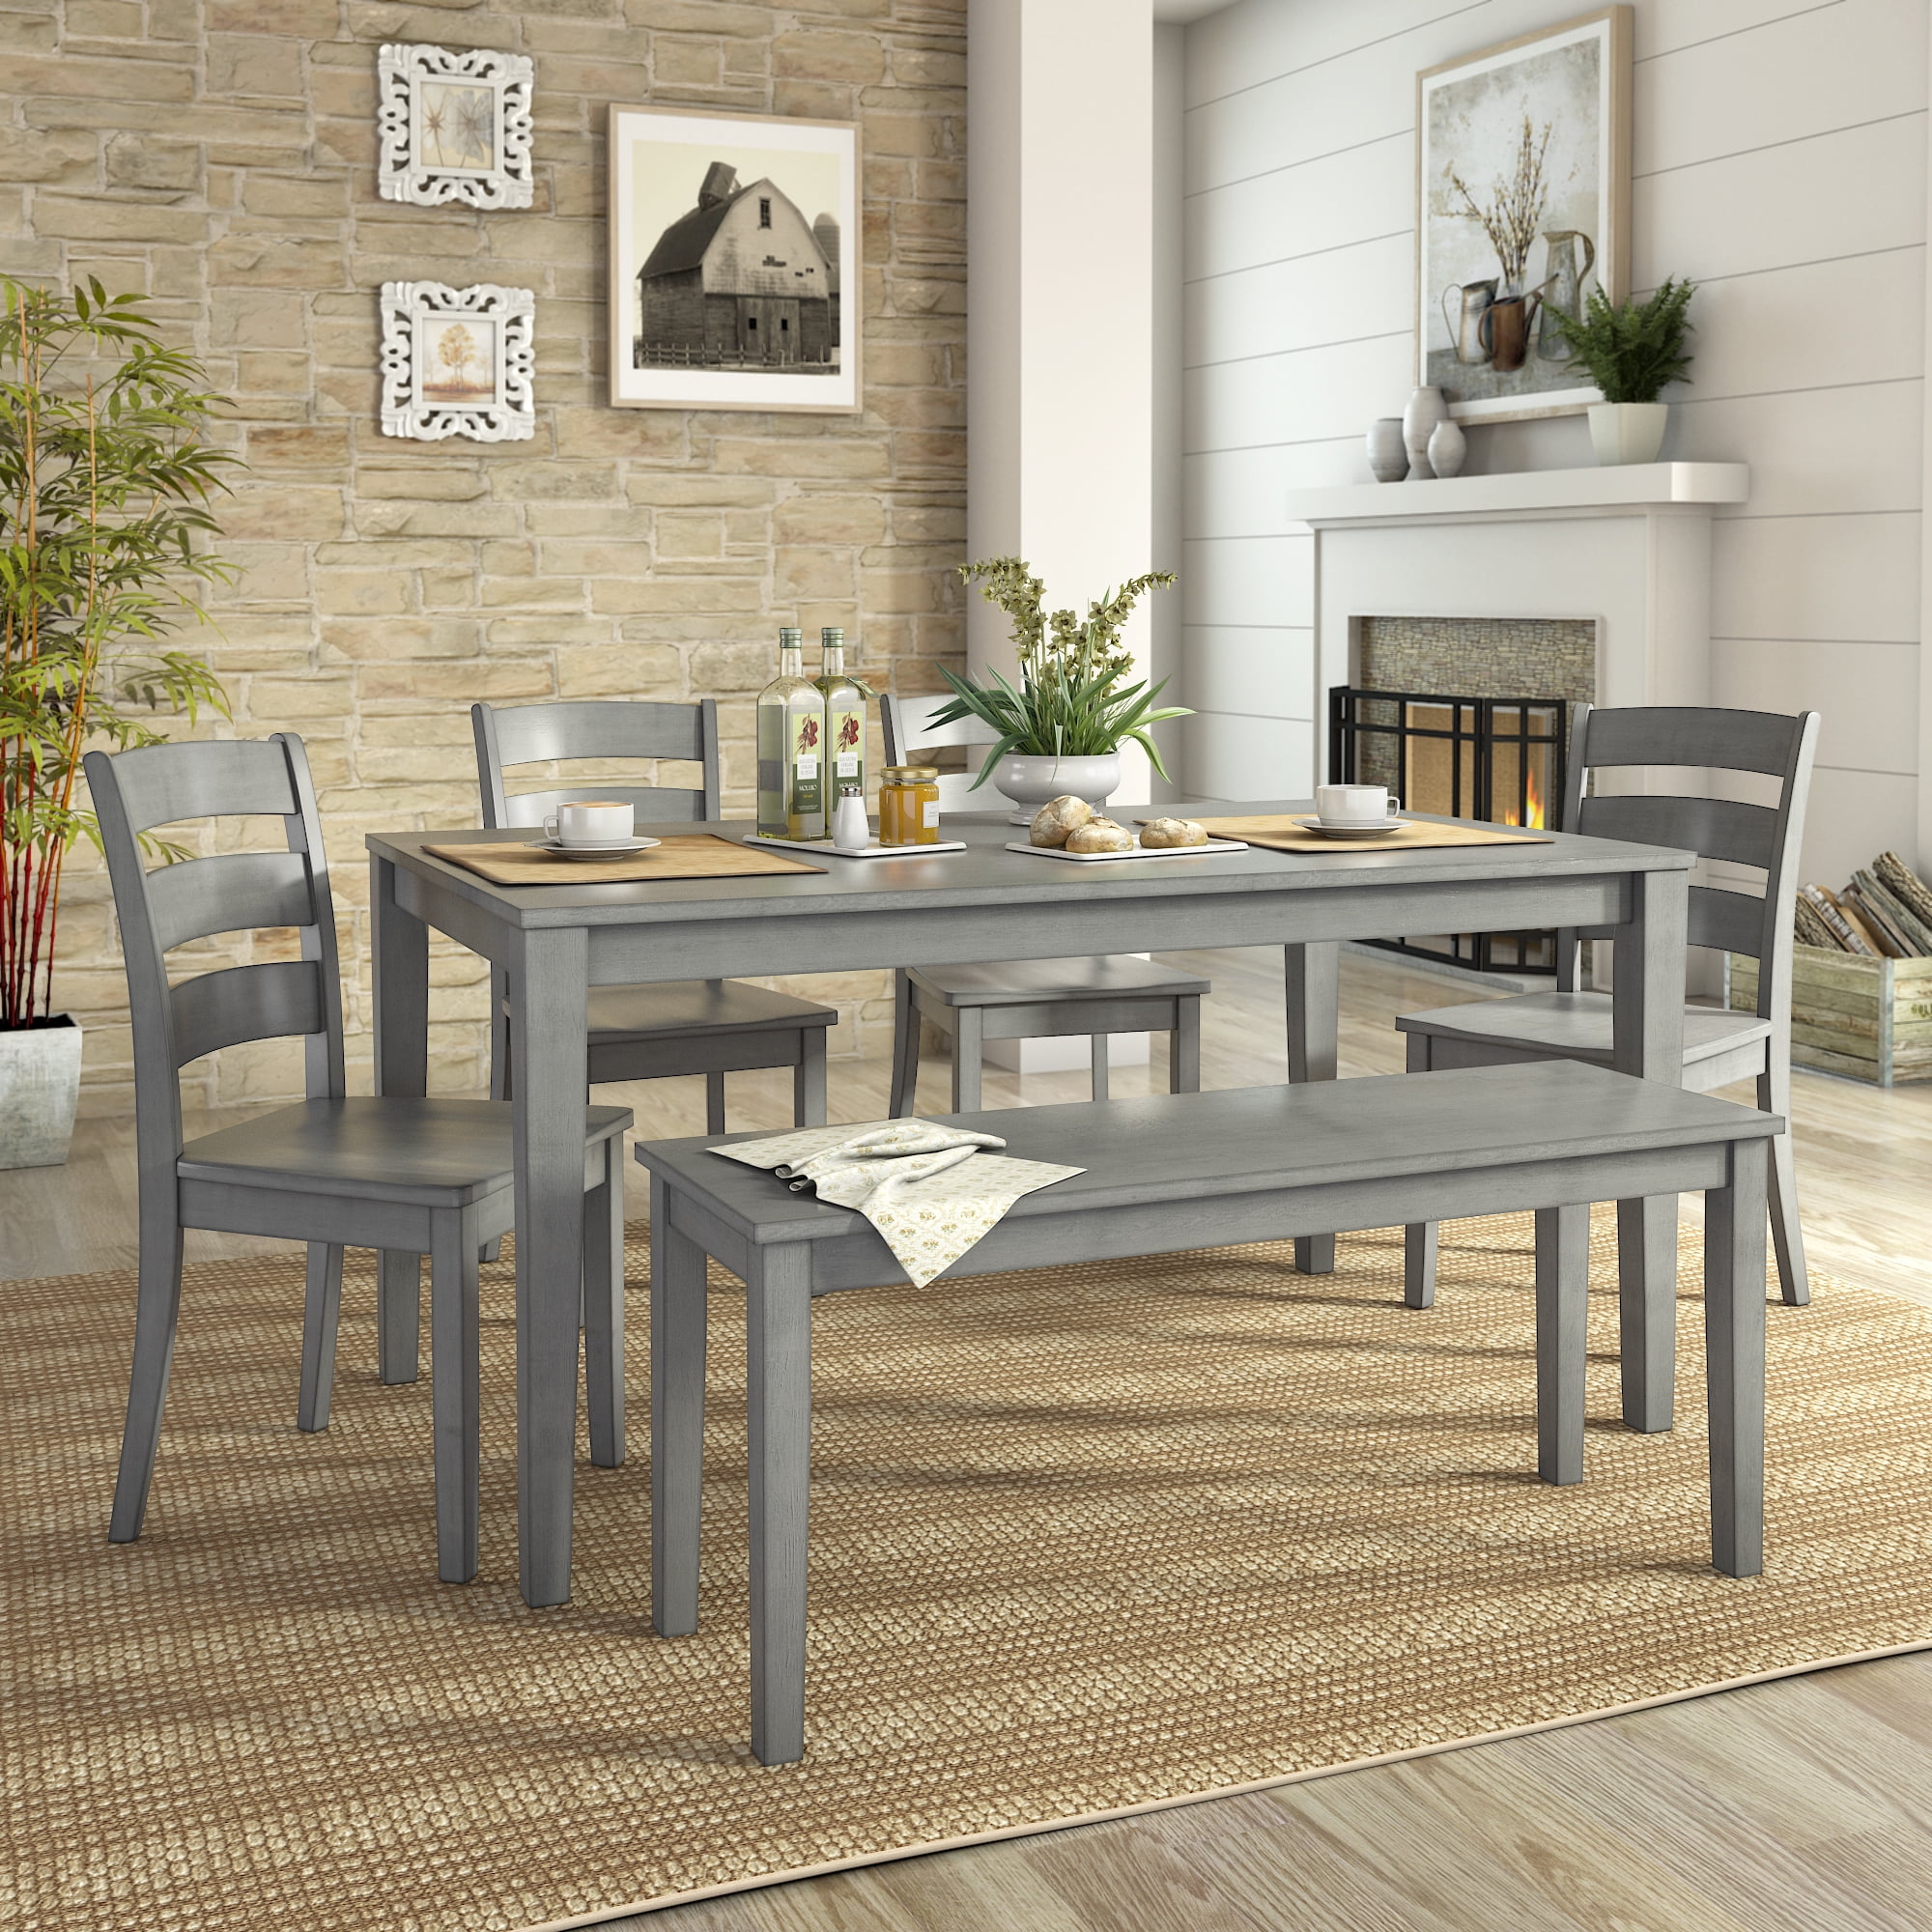 Weston Home Lexington Dining Set with Bench and 4 Ladder Back Chairs